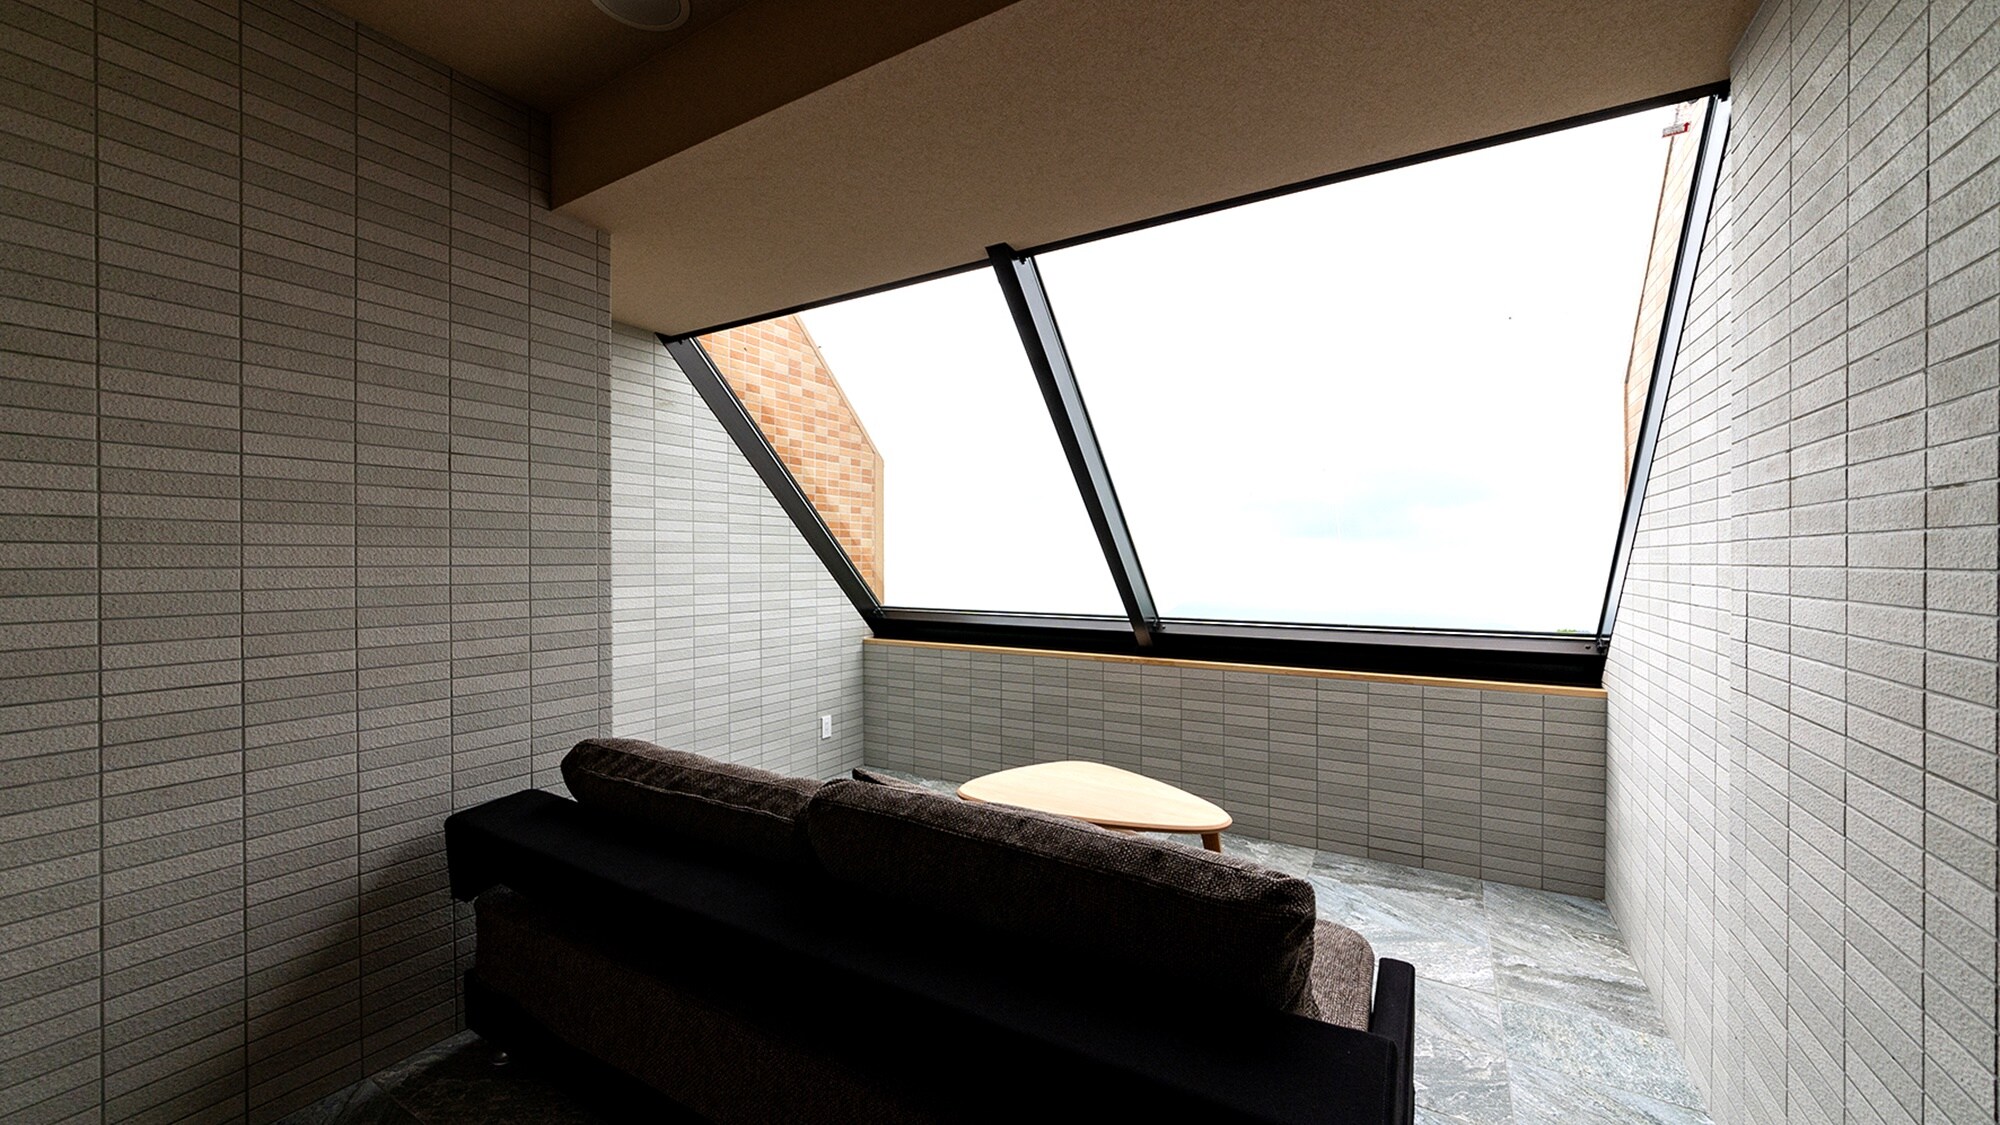 * Star room. There is a large window facing the ceiling on the second floor, where you can observe the starry sky.